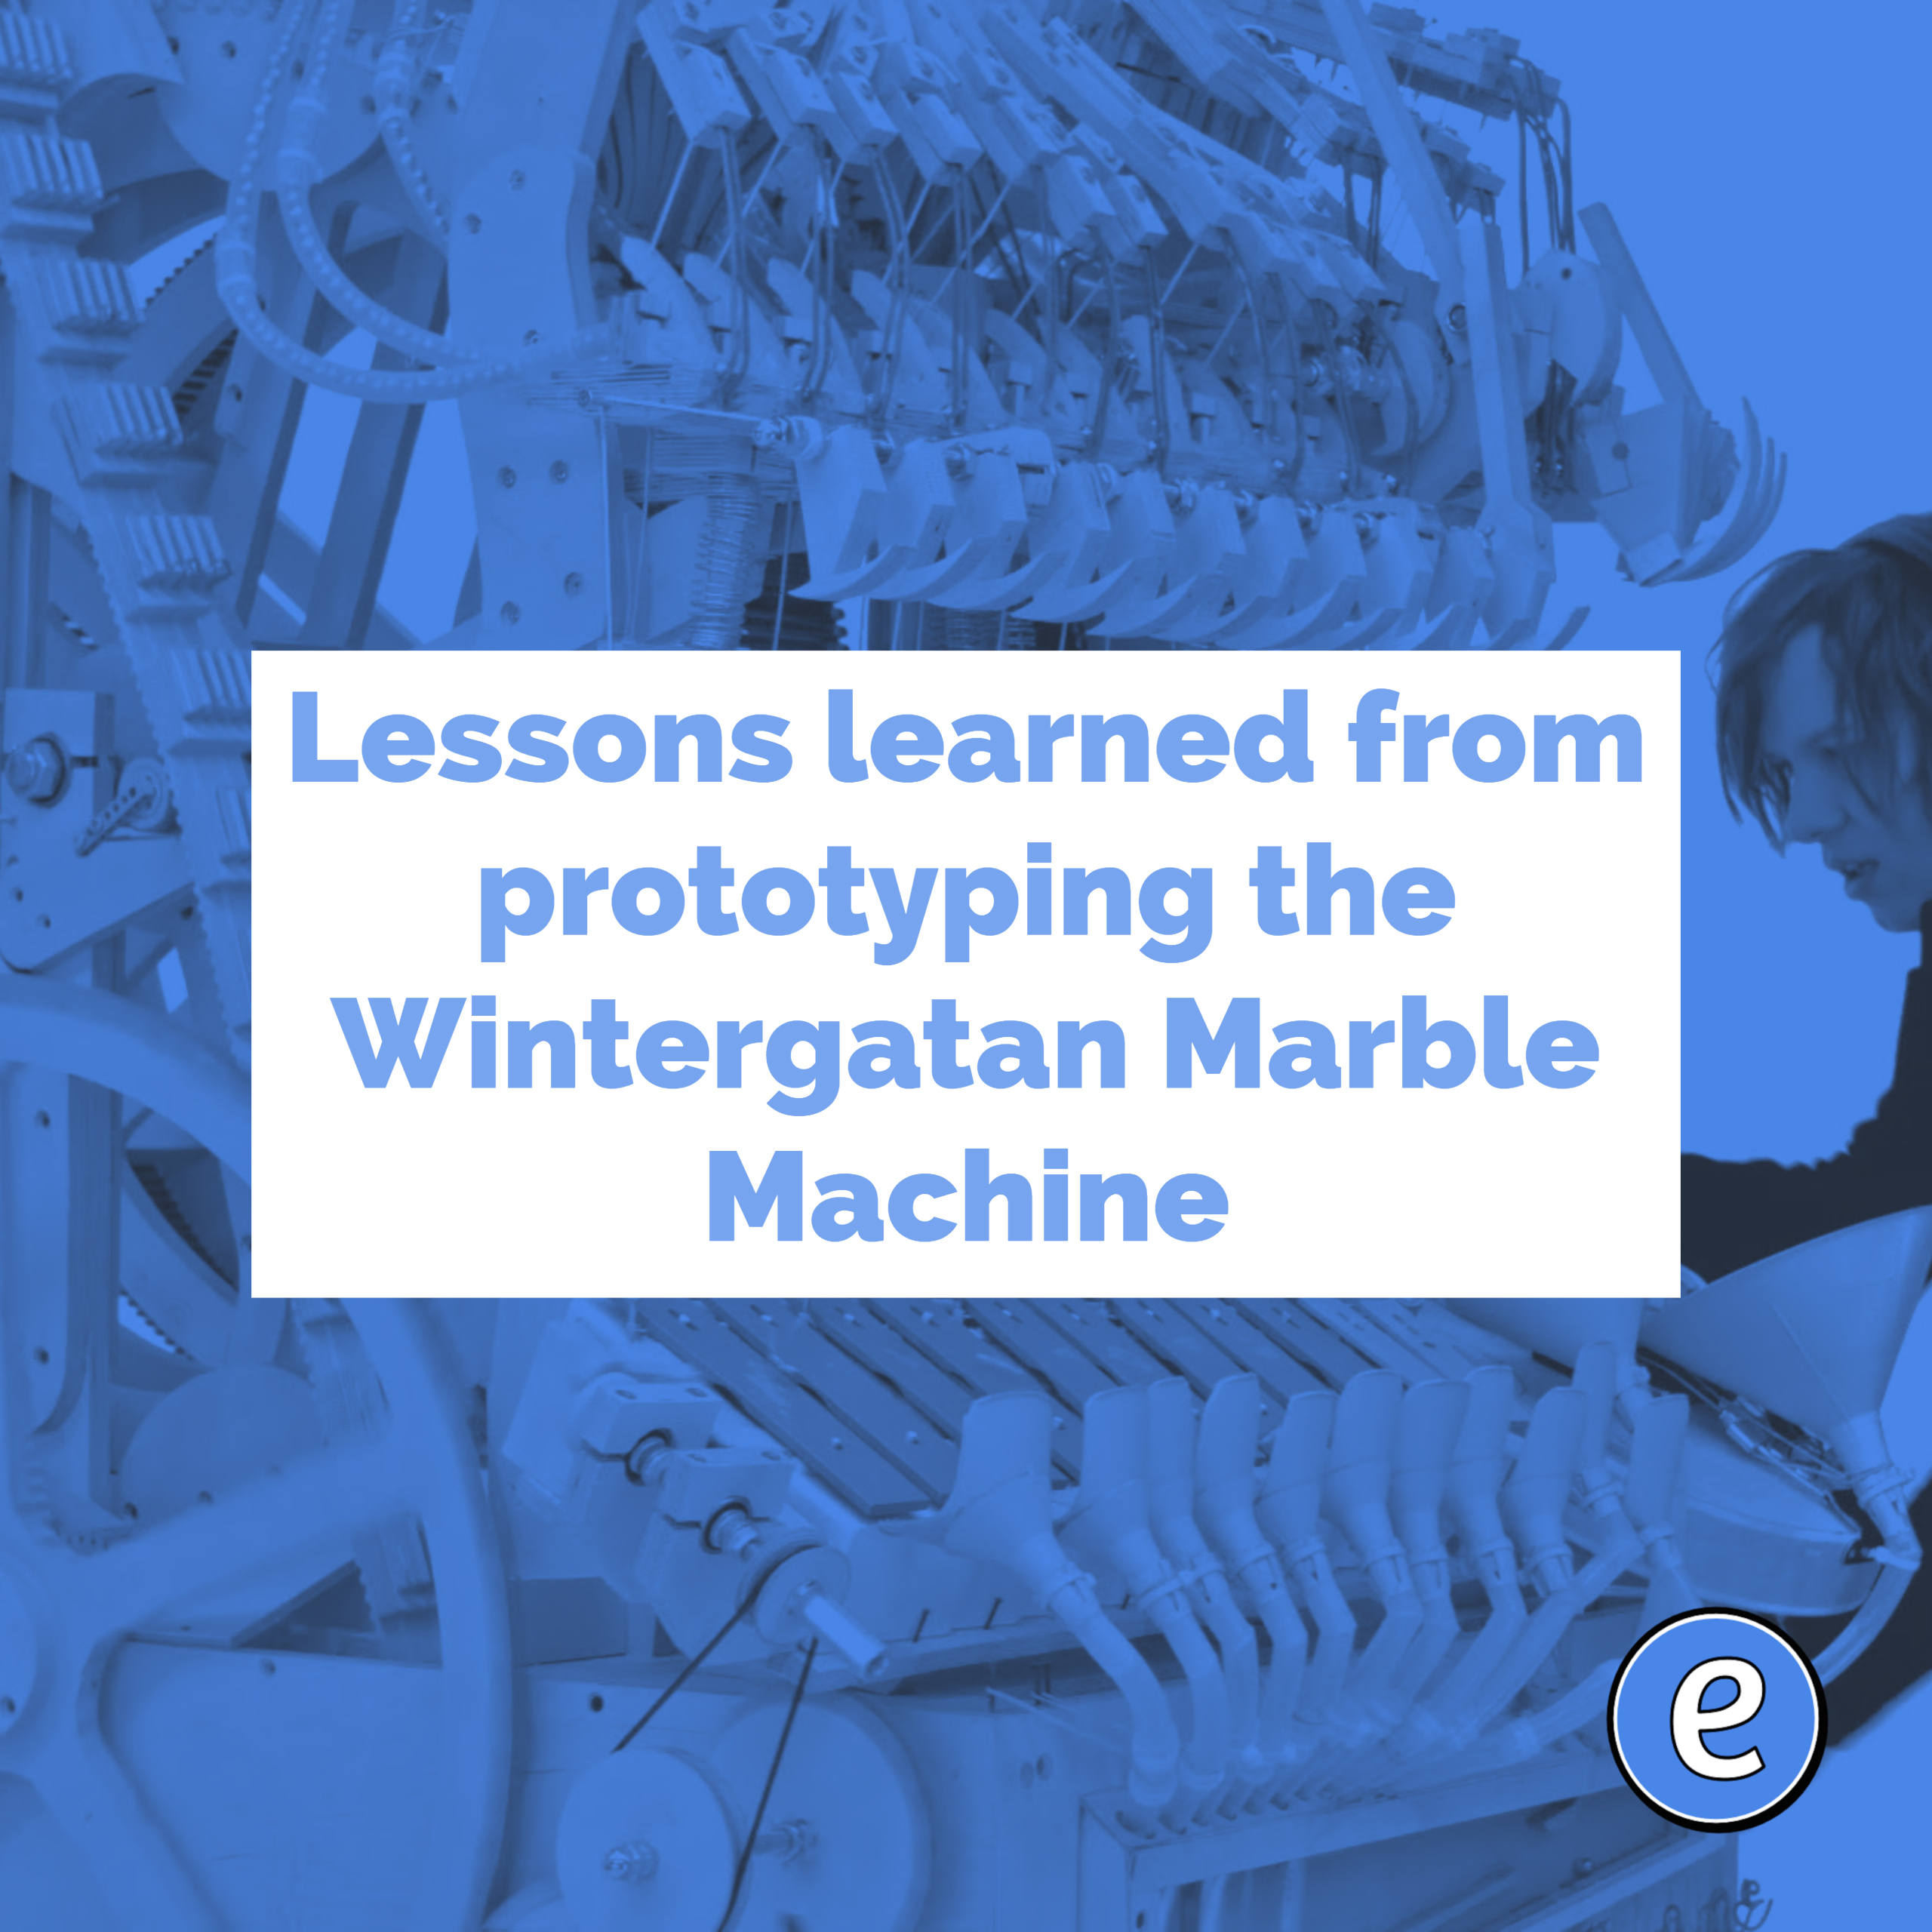 Lessons learned from prototyping the Wintergatan Marble Machine